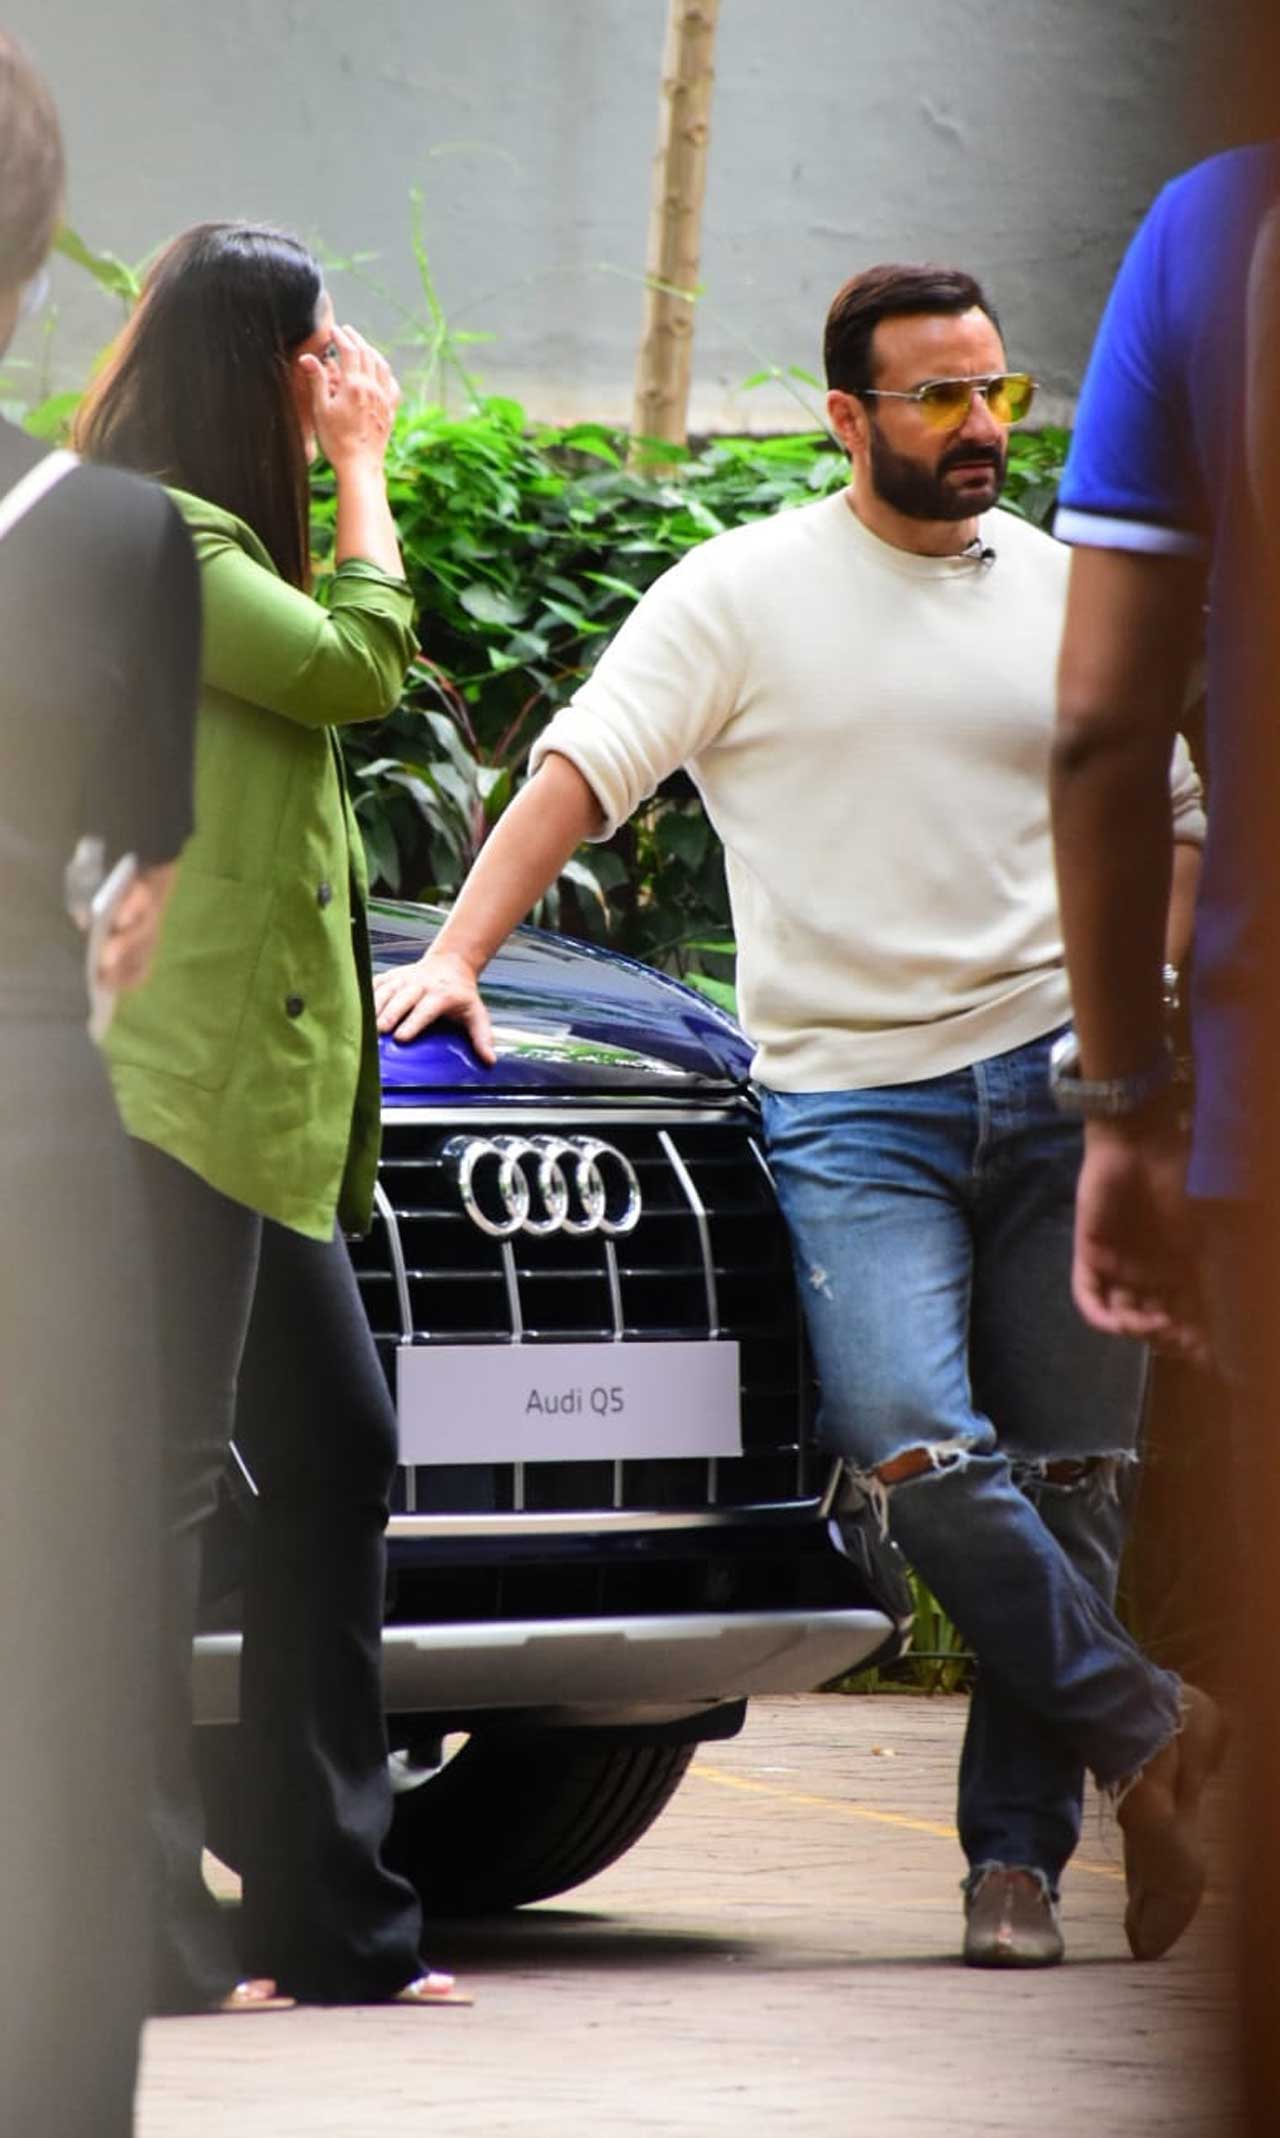 Soon after their return, Saif and Kareena got busy with their work commitments. The couple was spotted shooting together for a project today outside their Banrda residence. 